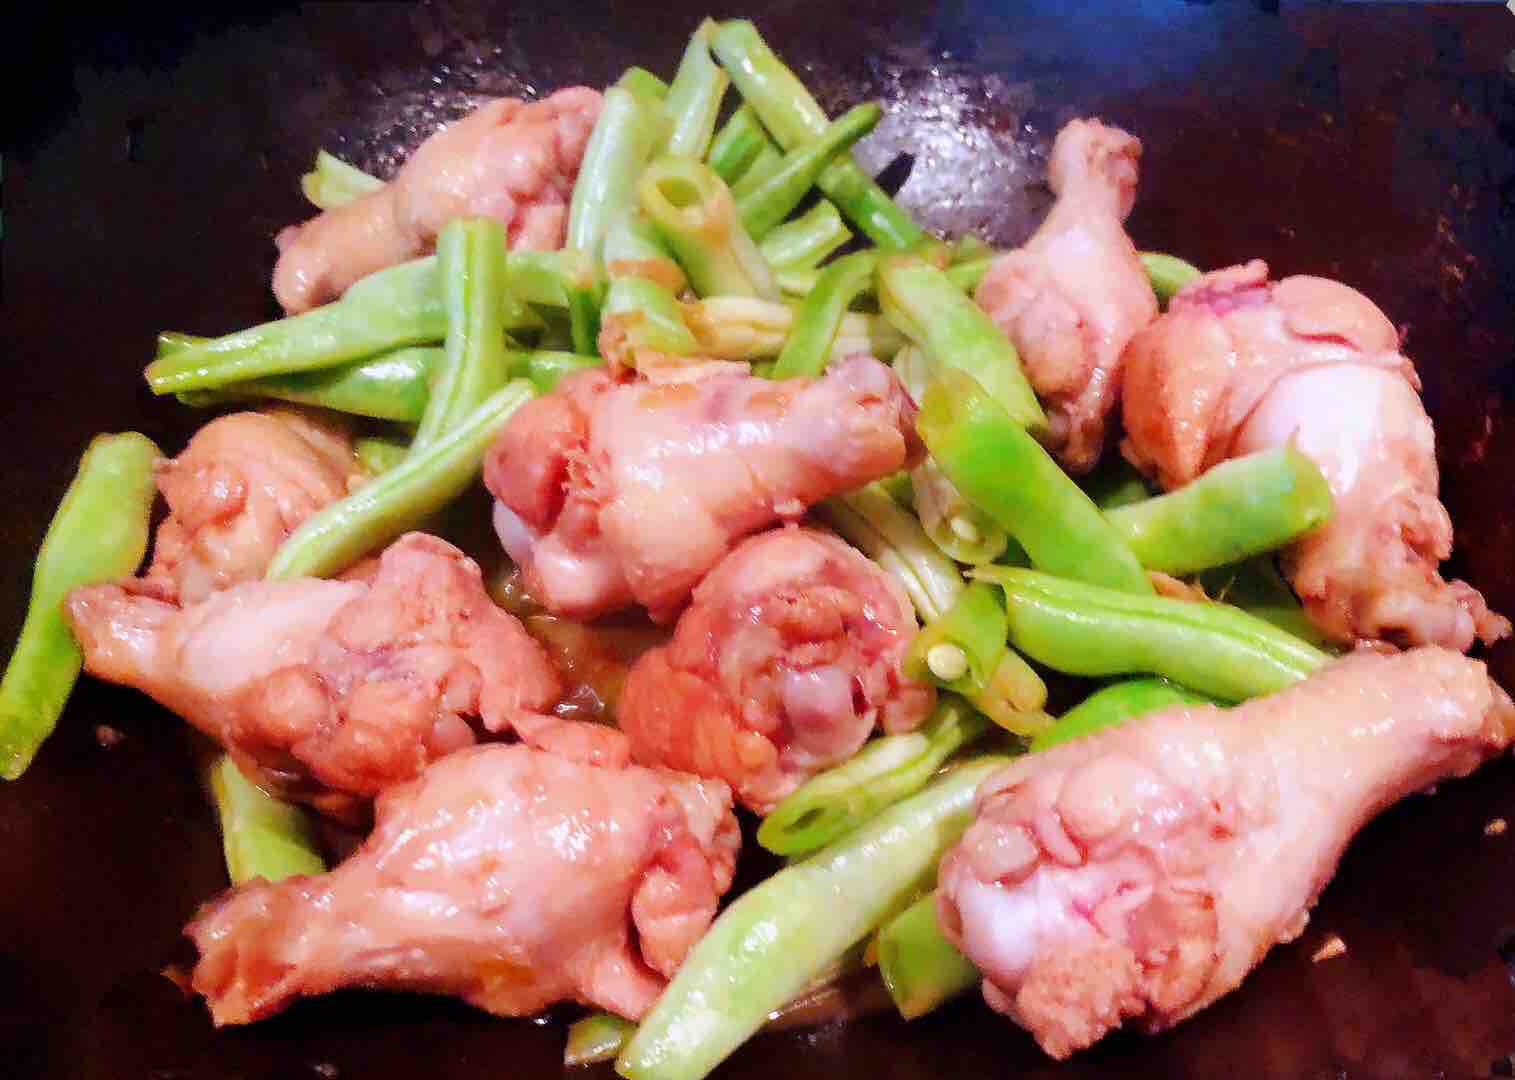 Braised Beans with Mushroom and Chicken Wing Root recipe